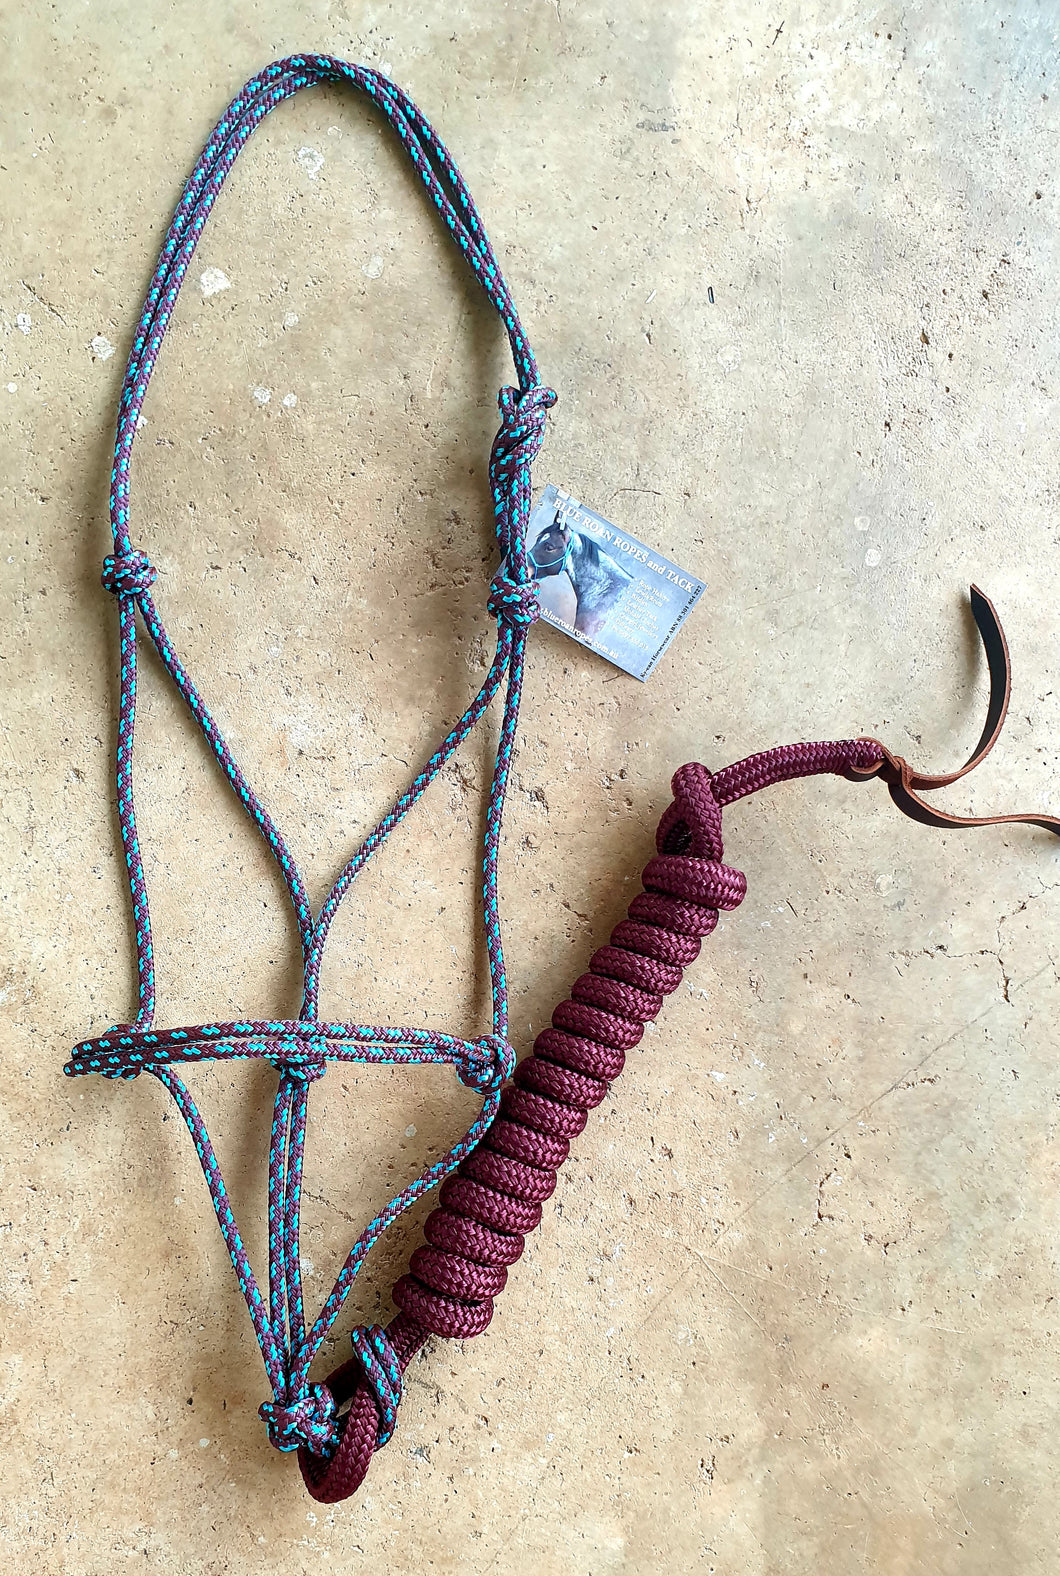 ROPE HALTER and LEAD SET - End of Line